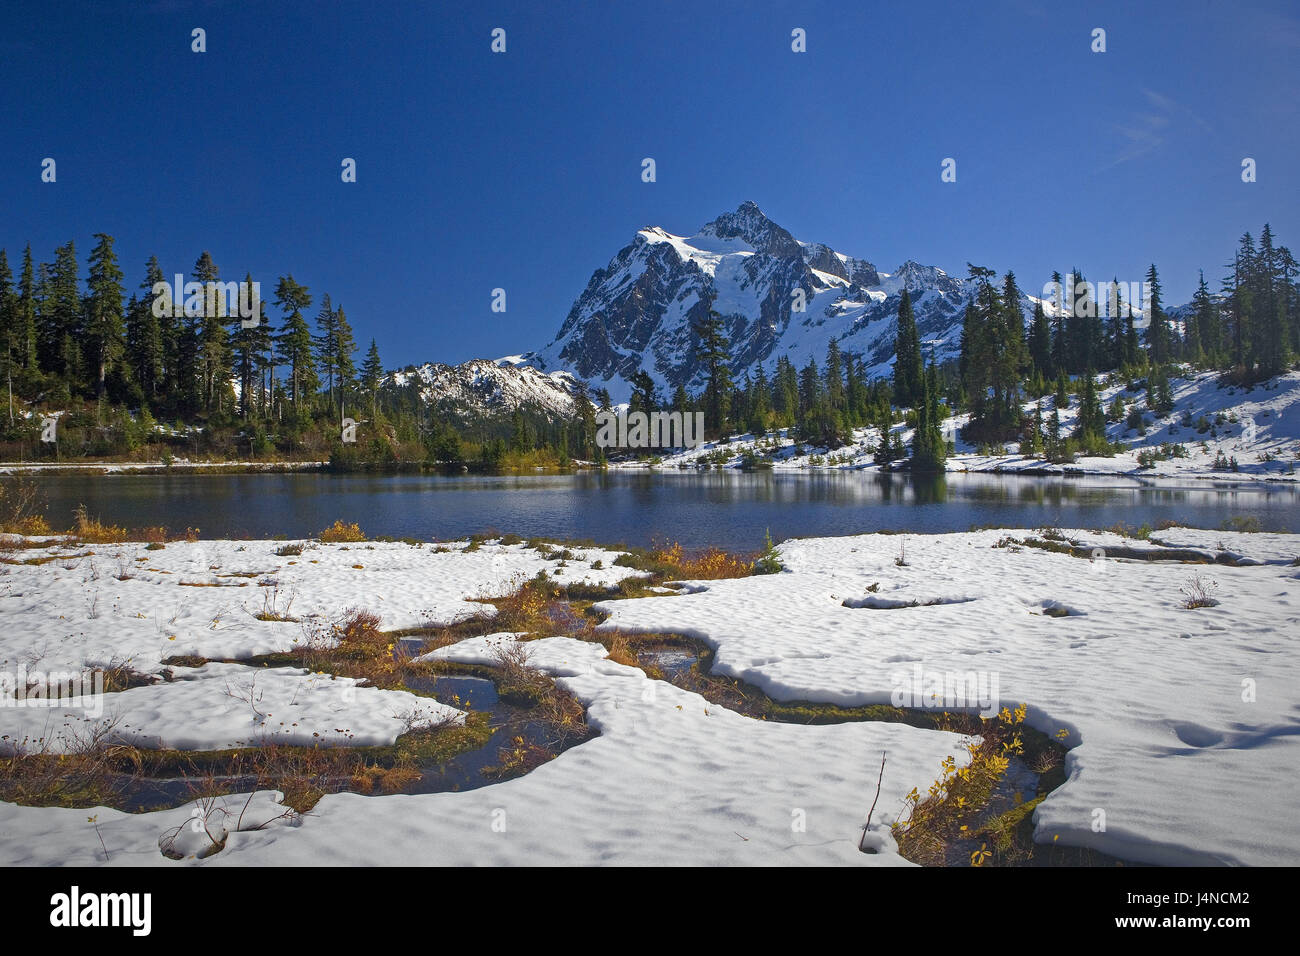 The USA, Heather Meadows, Picture brine, Mount Shuksan, snow, North America, destination, scenery, place of interest, nature, mirroring, water surface, snow leftovers, sunny, deserted, remotely, Idyll, lake, Stock Photo